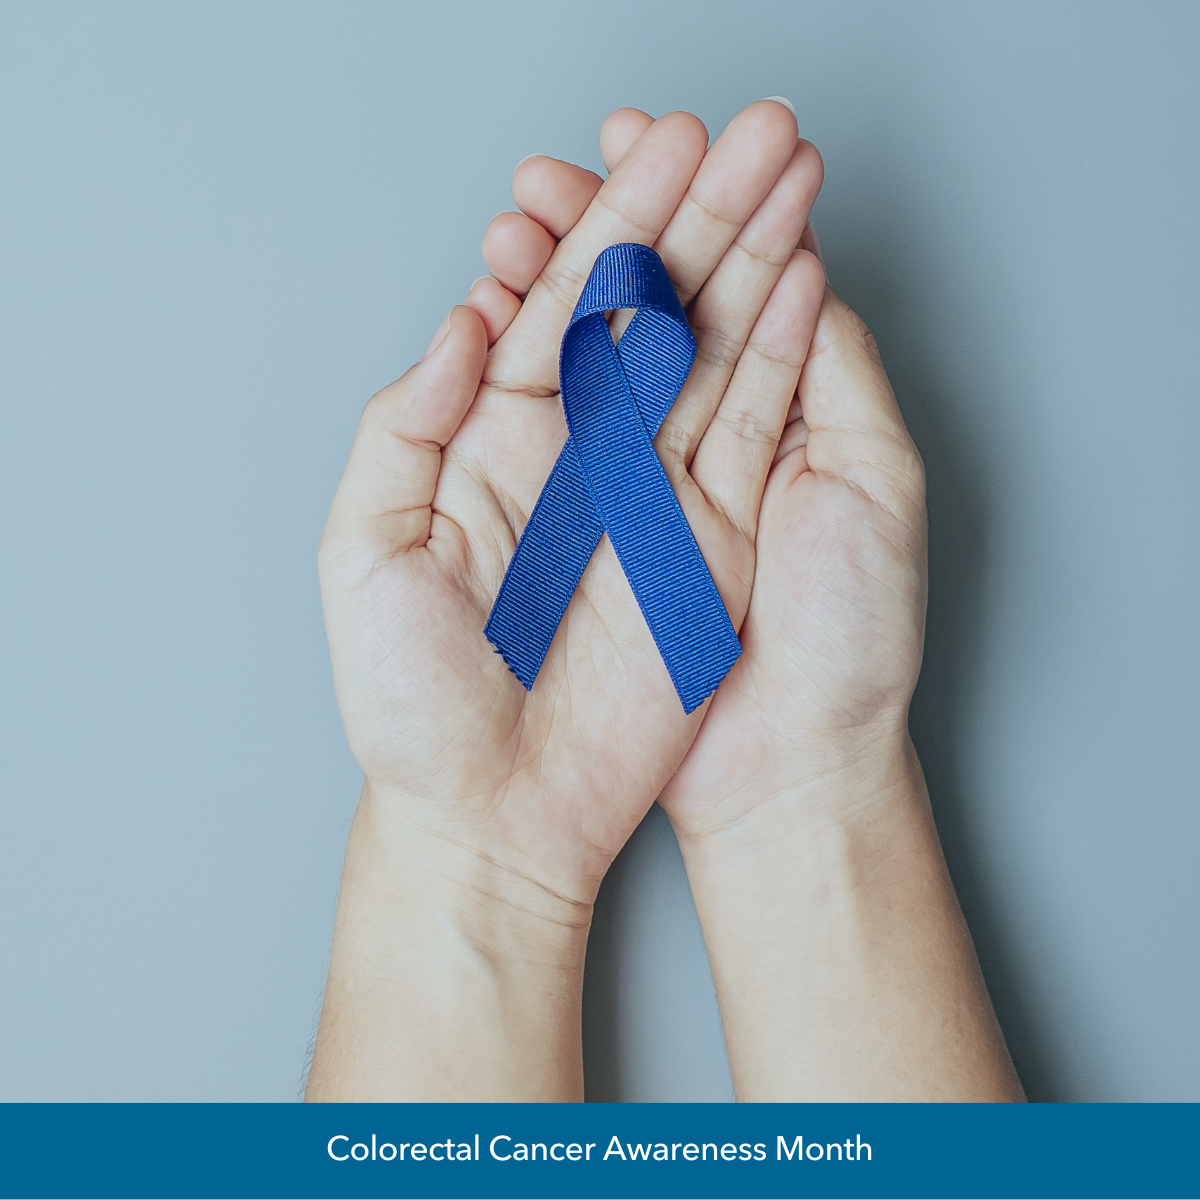 Image of pair of hands holding blue cancer ribbon